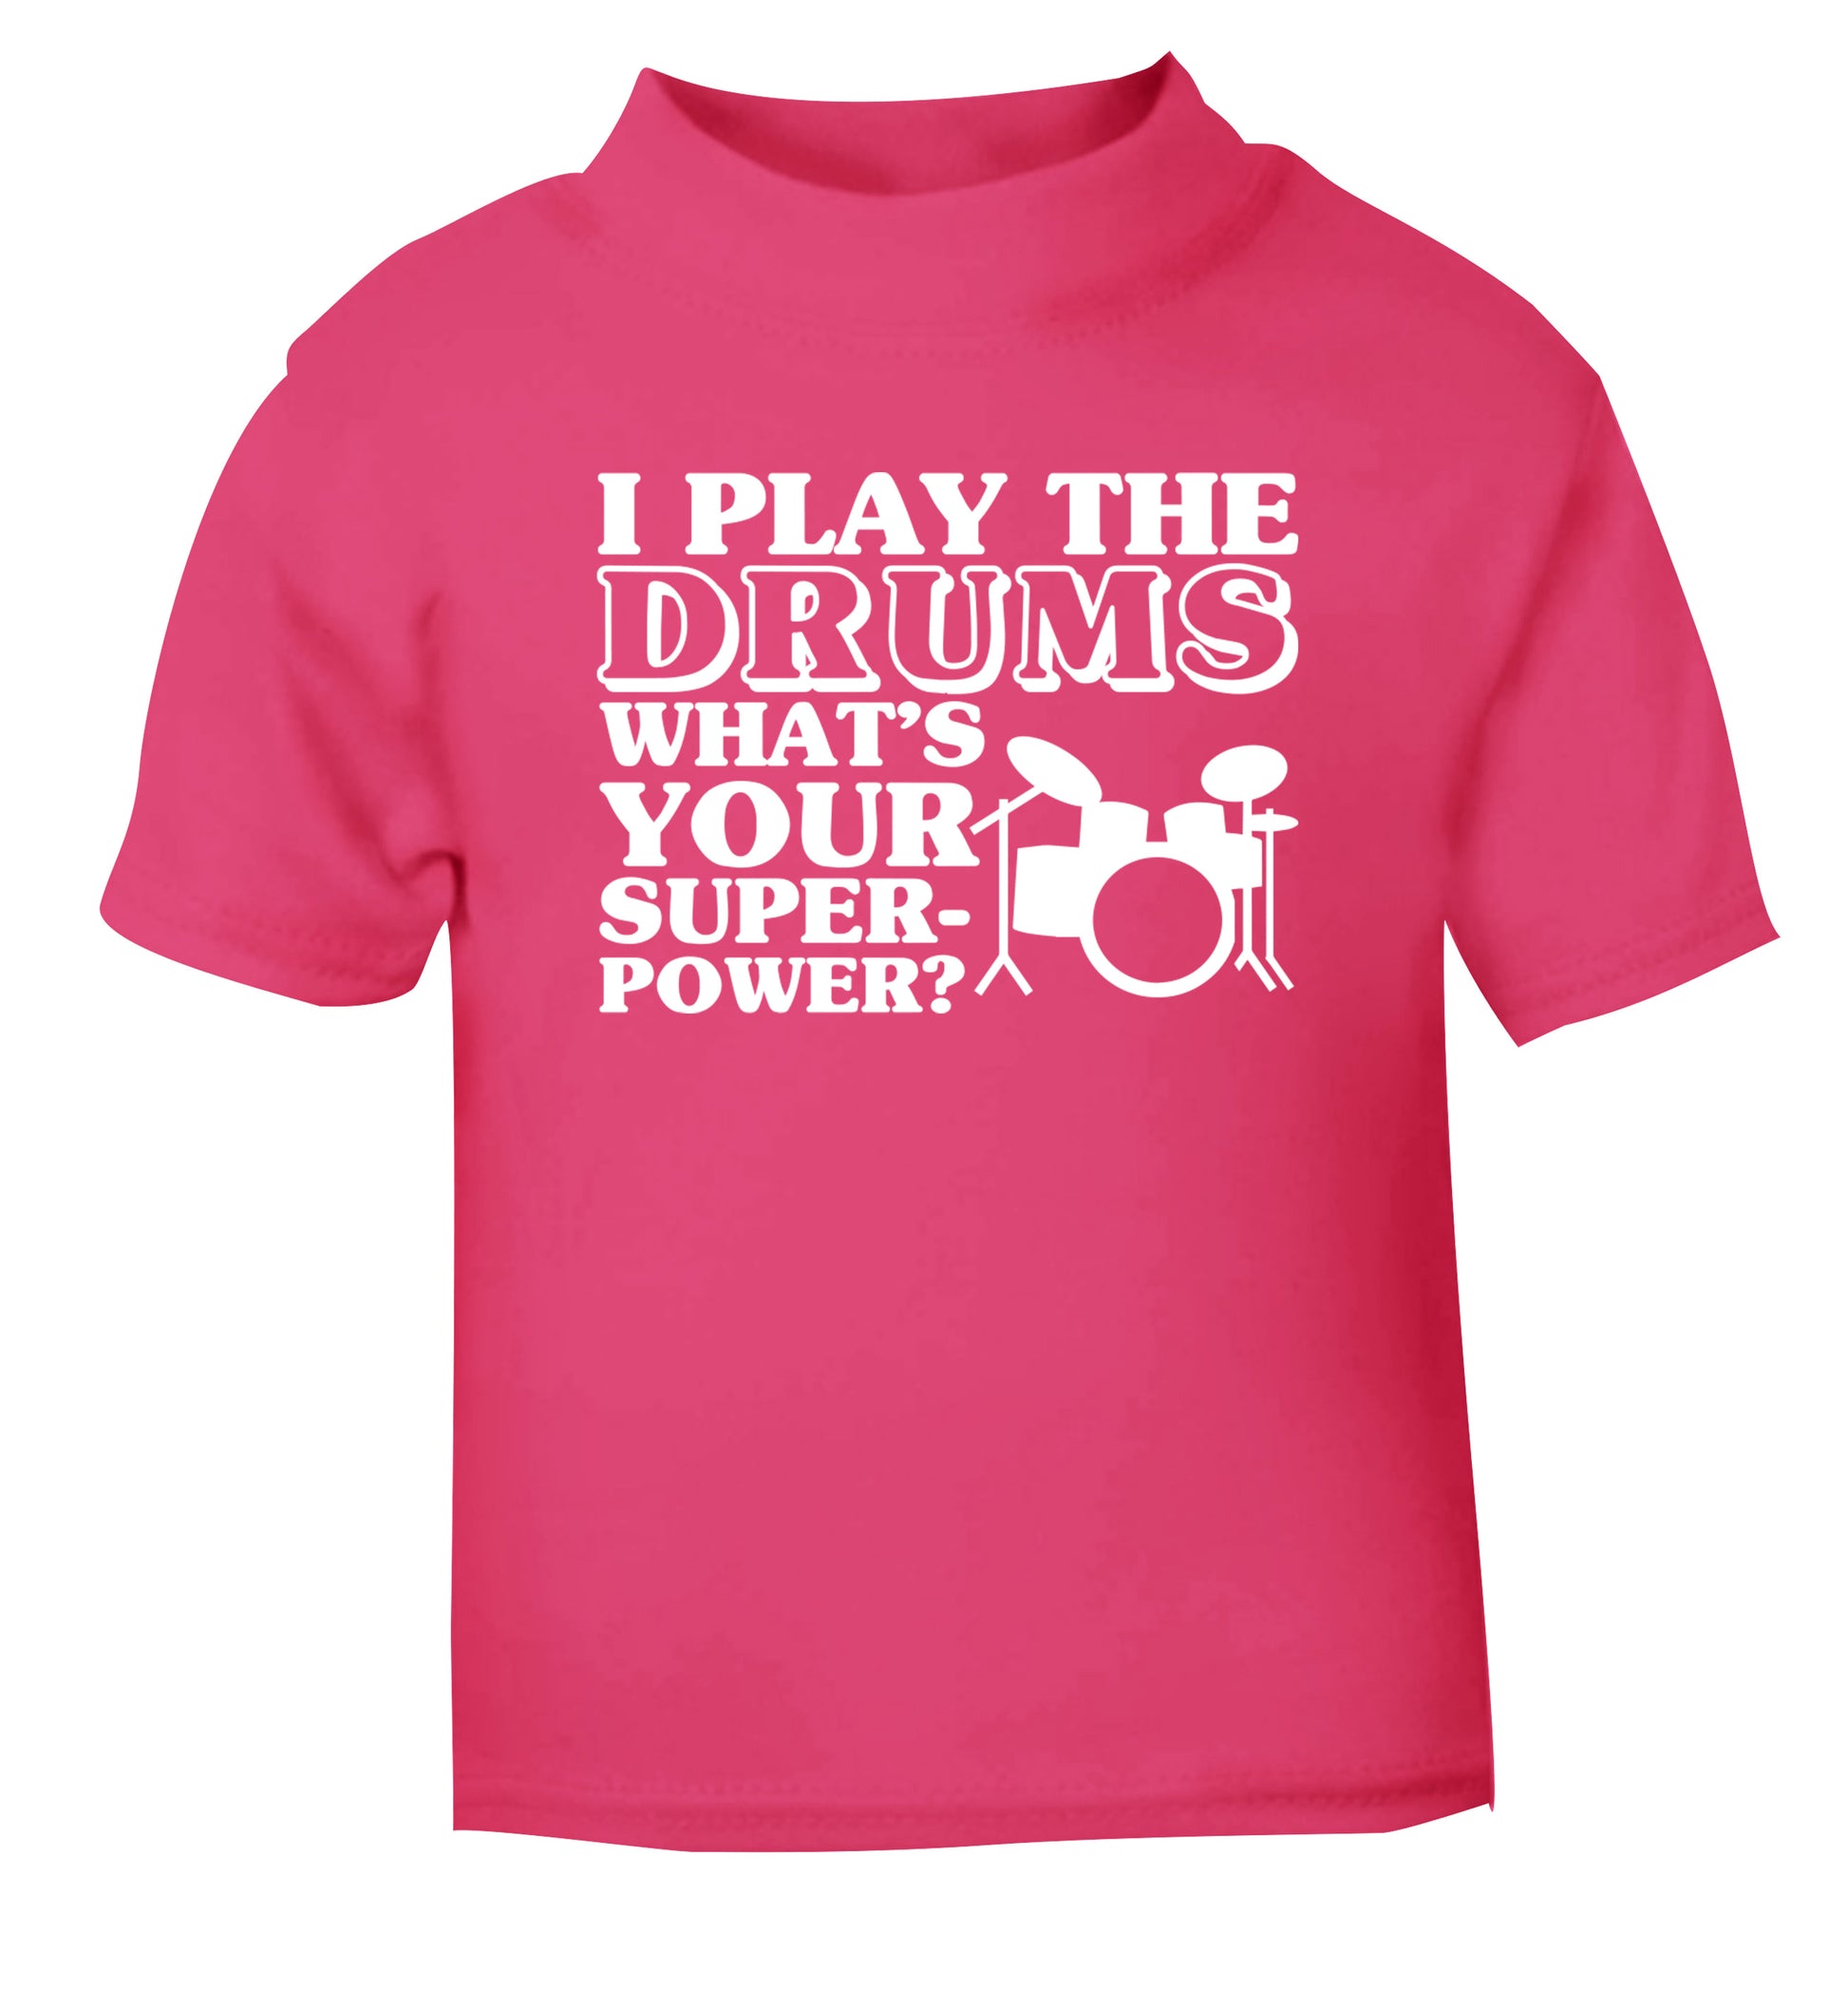 I play the drums what's your superpower? pink Baby Toddler Tshirt 2 Years